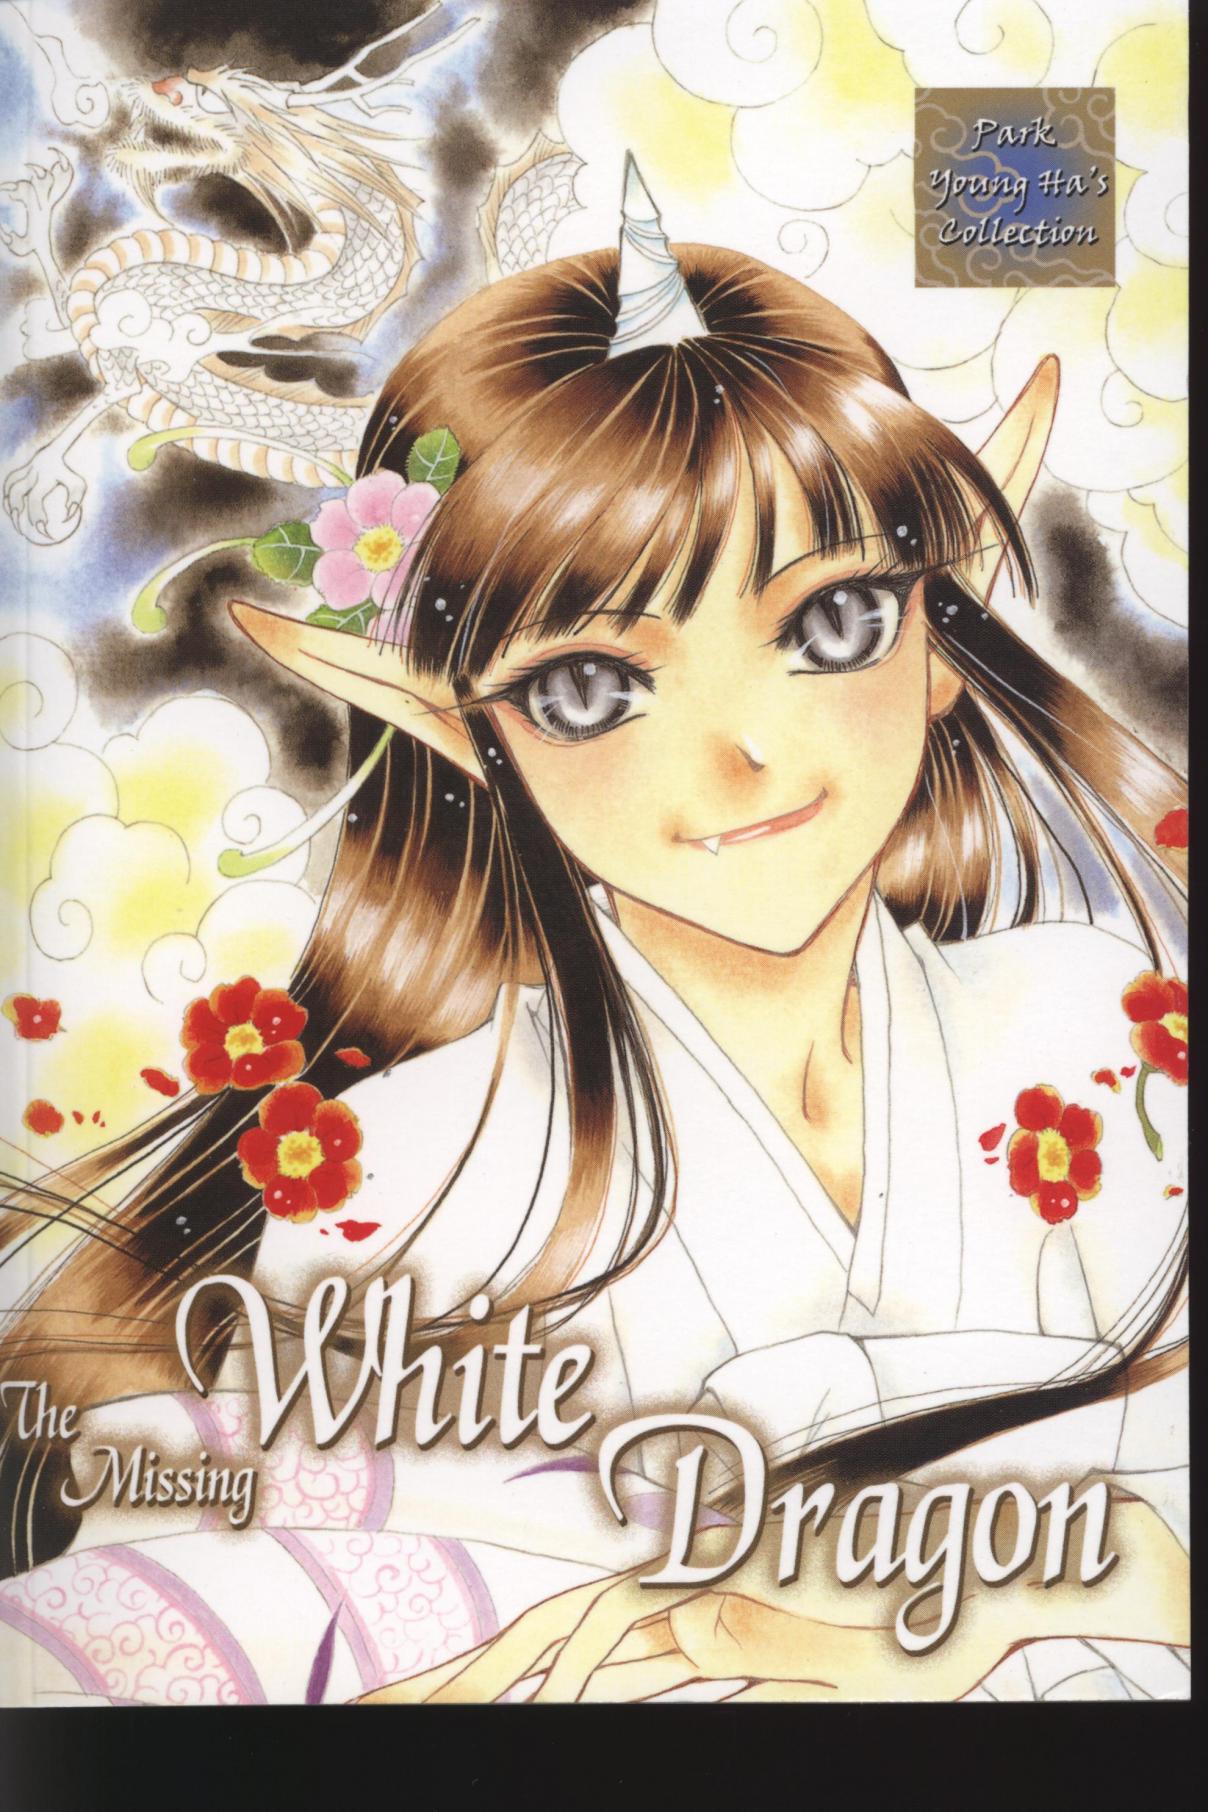 The Missing White Dragon Vol. 1 Ch. 1 1st tale The Missing White Dragon